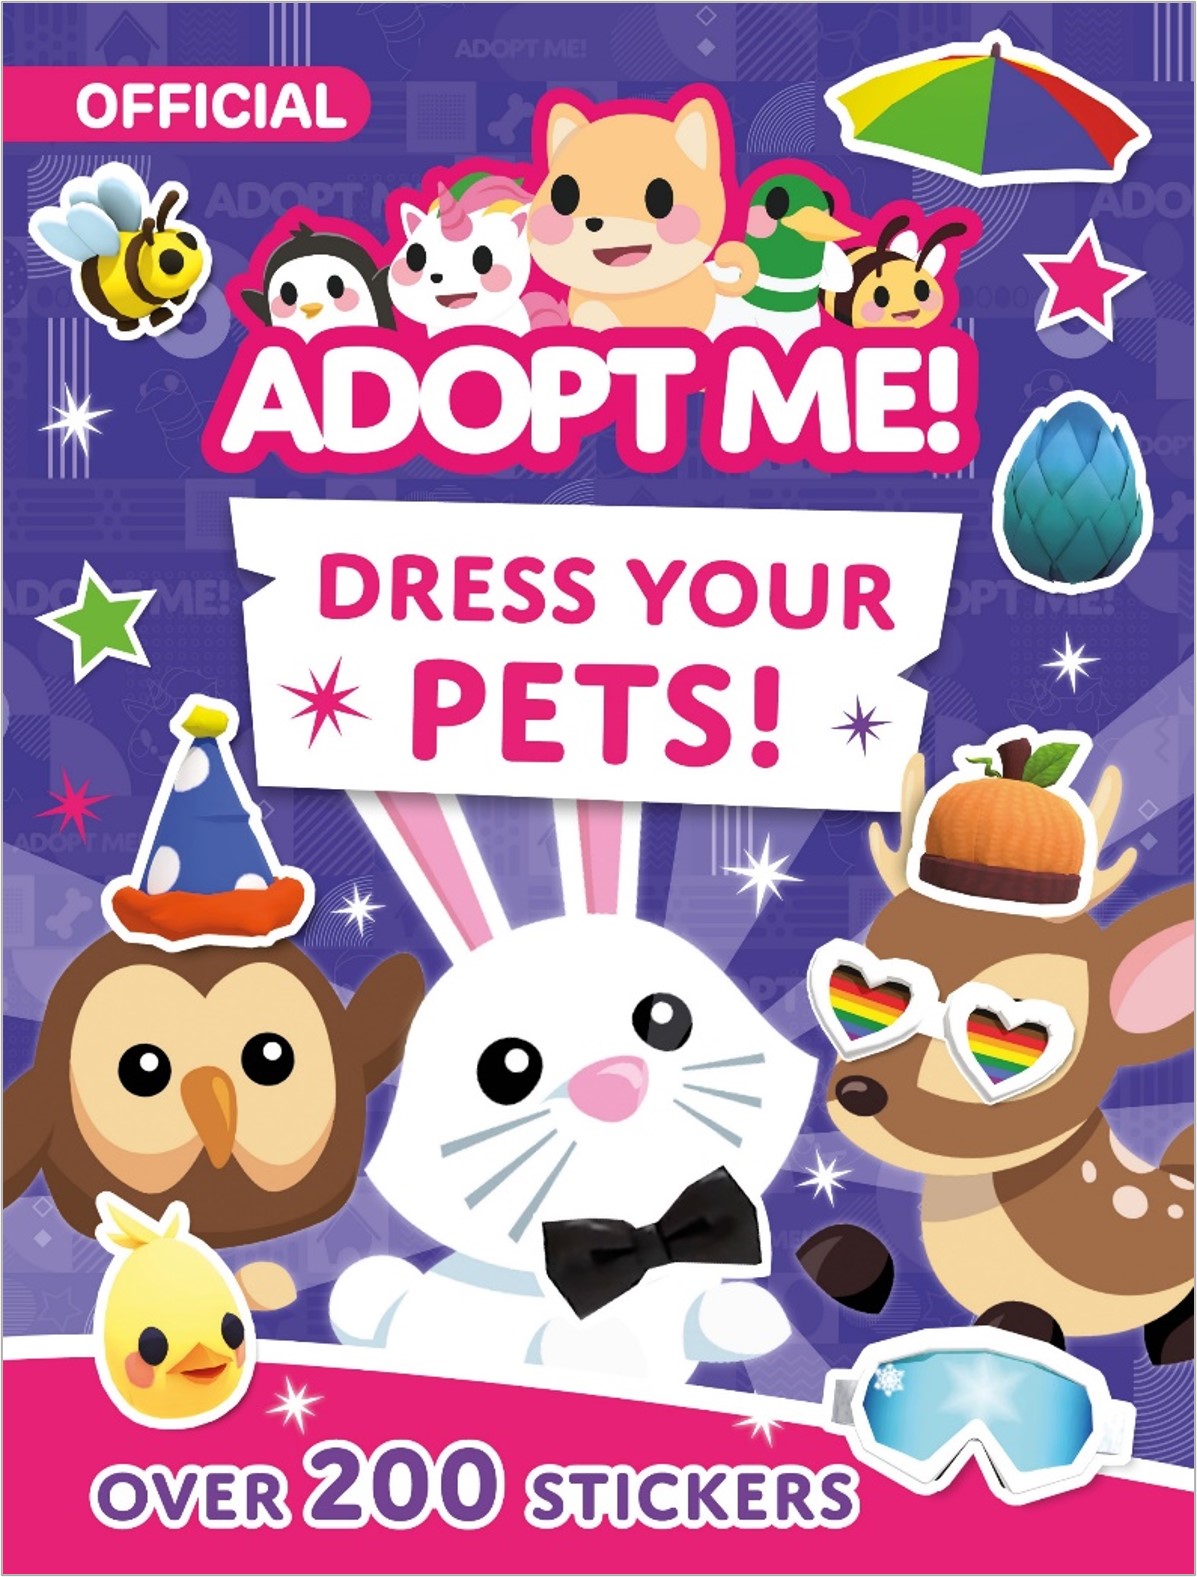 Children's Picture Books: Adopt Me! Dress Your Pets!